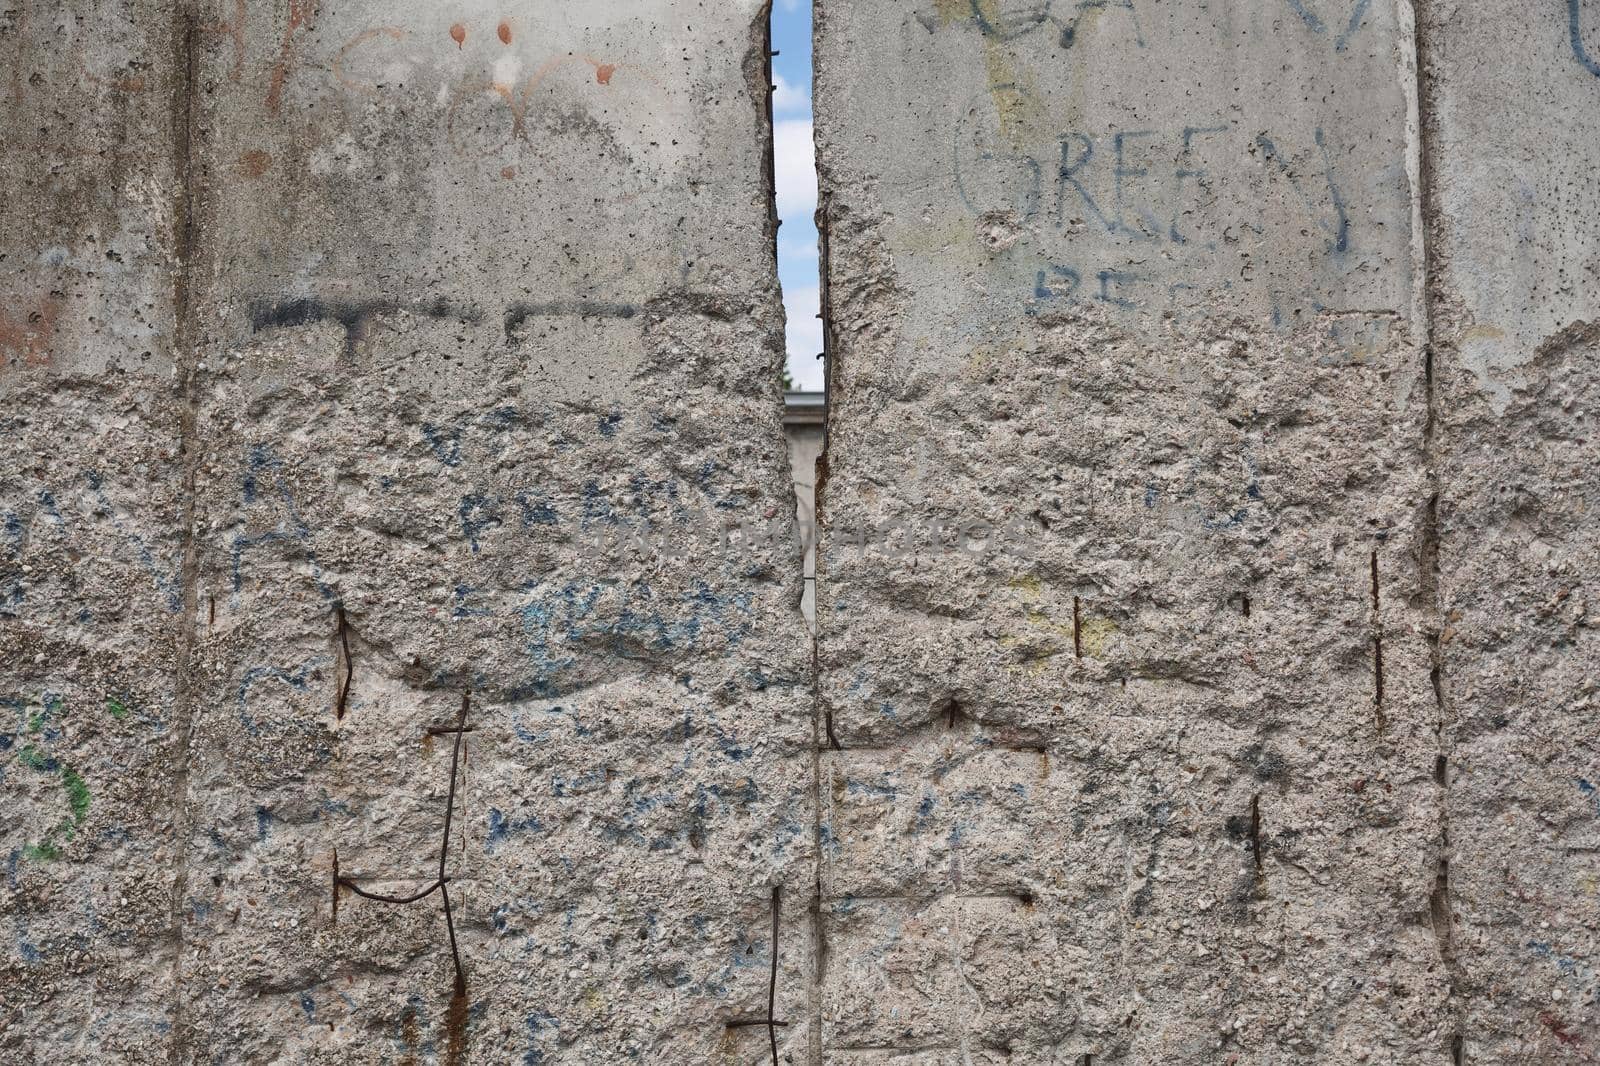 Detail of the remains of the Berlin Wall, Berlin, Germany. Segments of wall left as a reminder of events leading up to the fall of the wall in November 1989.